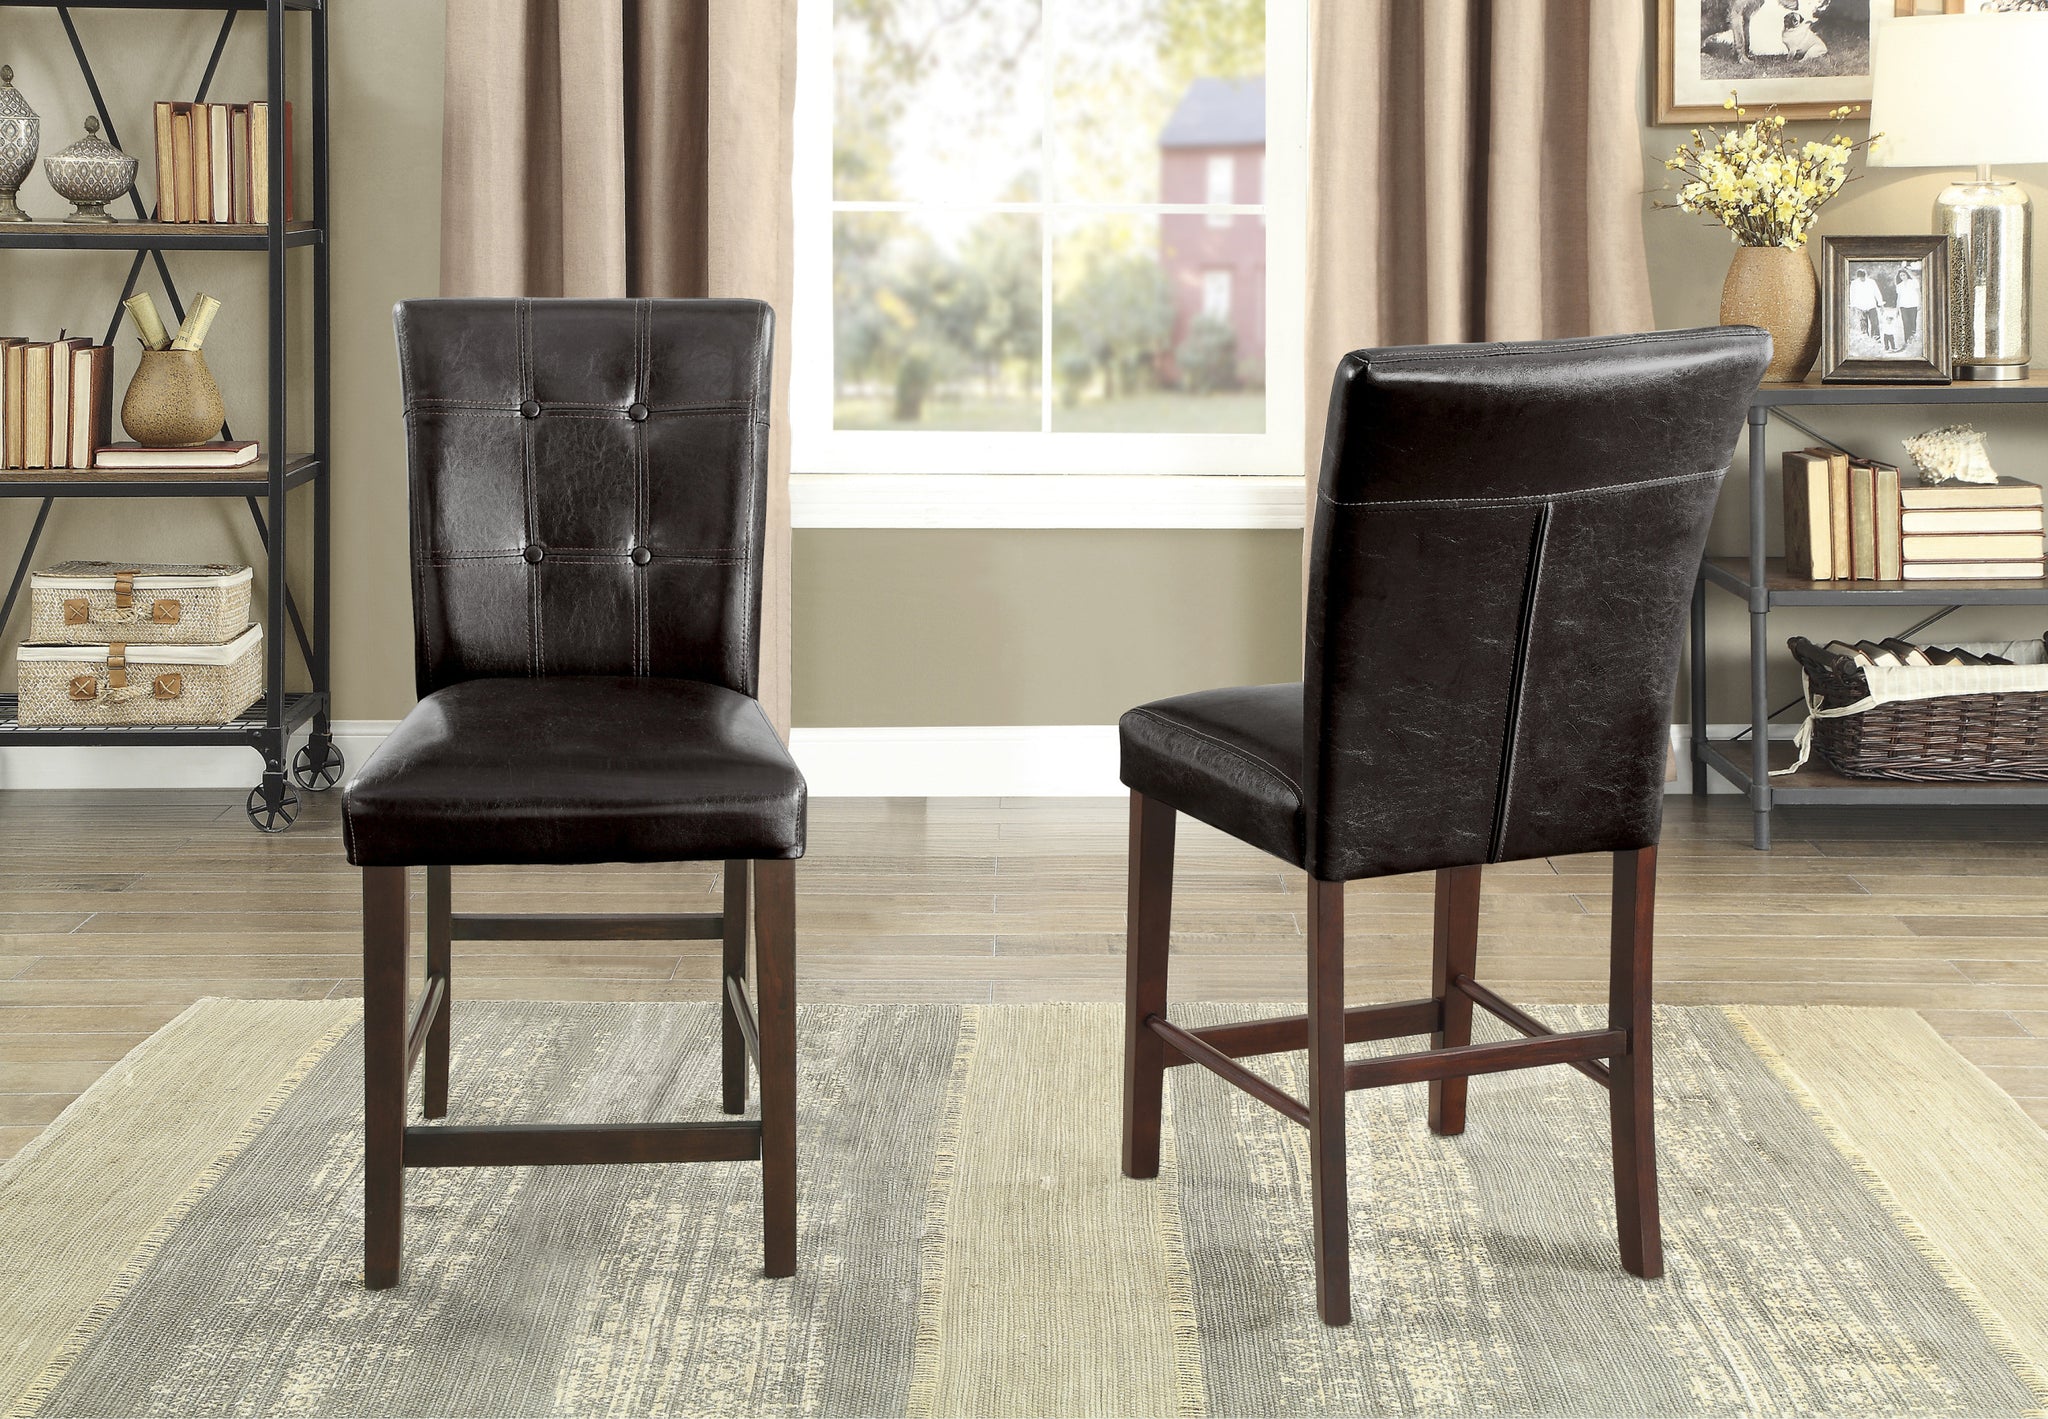 Espresso Finish 2pc Set Counter Height Chairs Faux espresso-dining room-side chair-wood